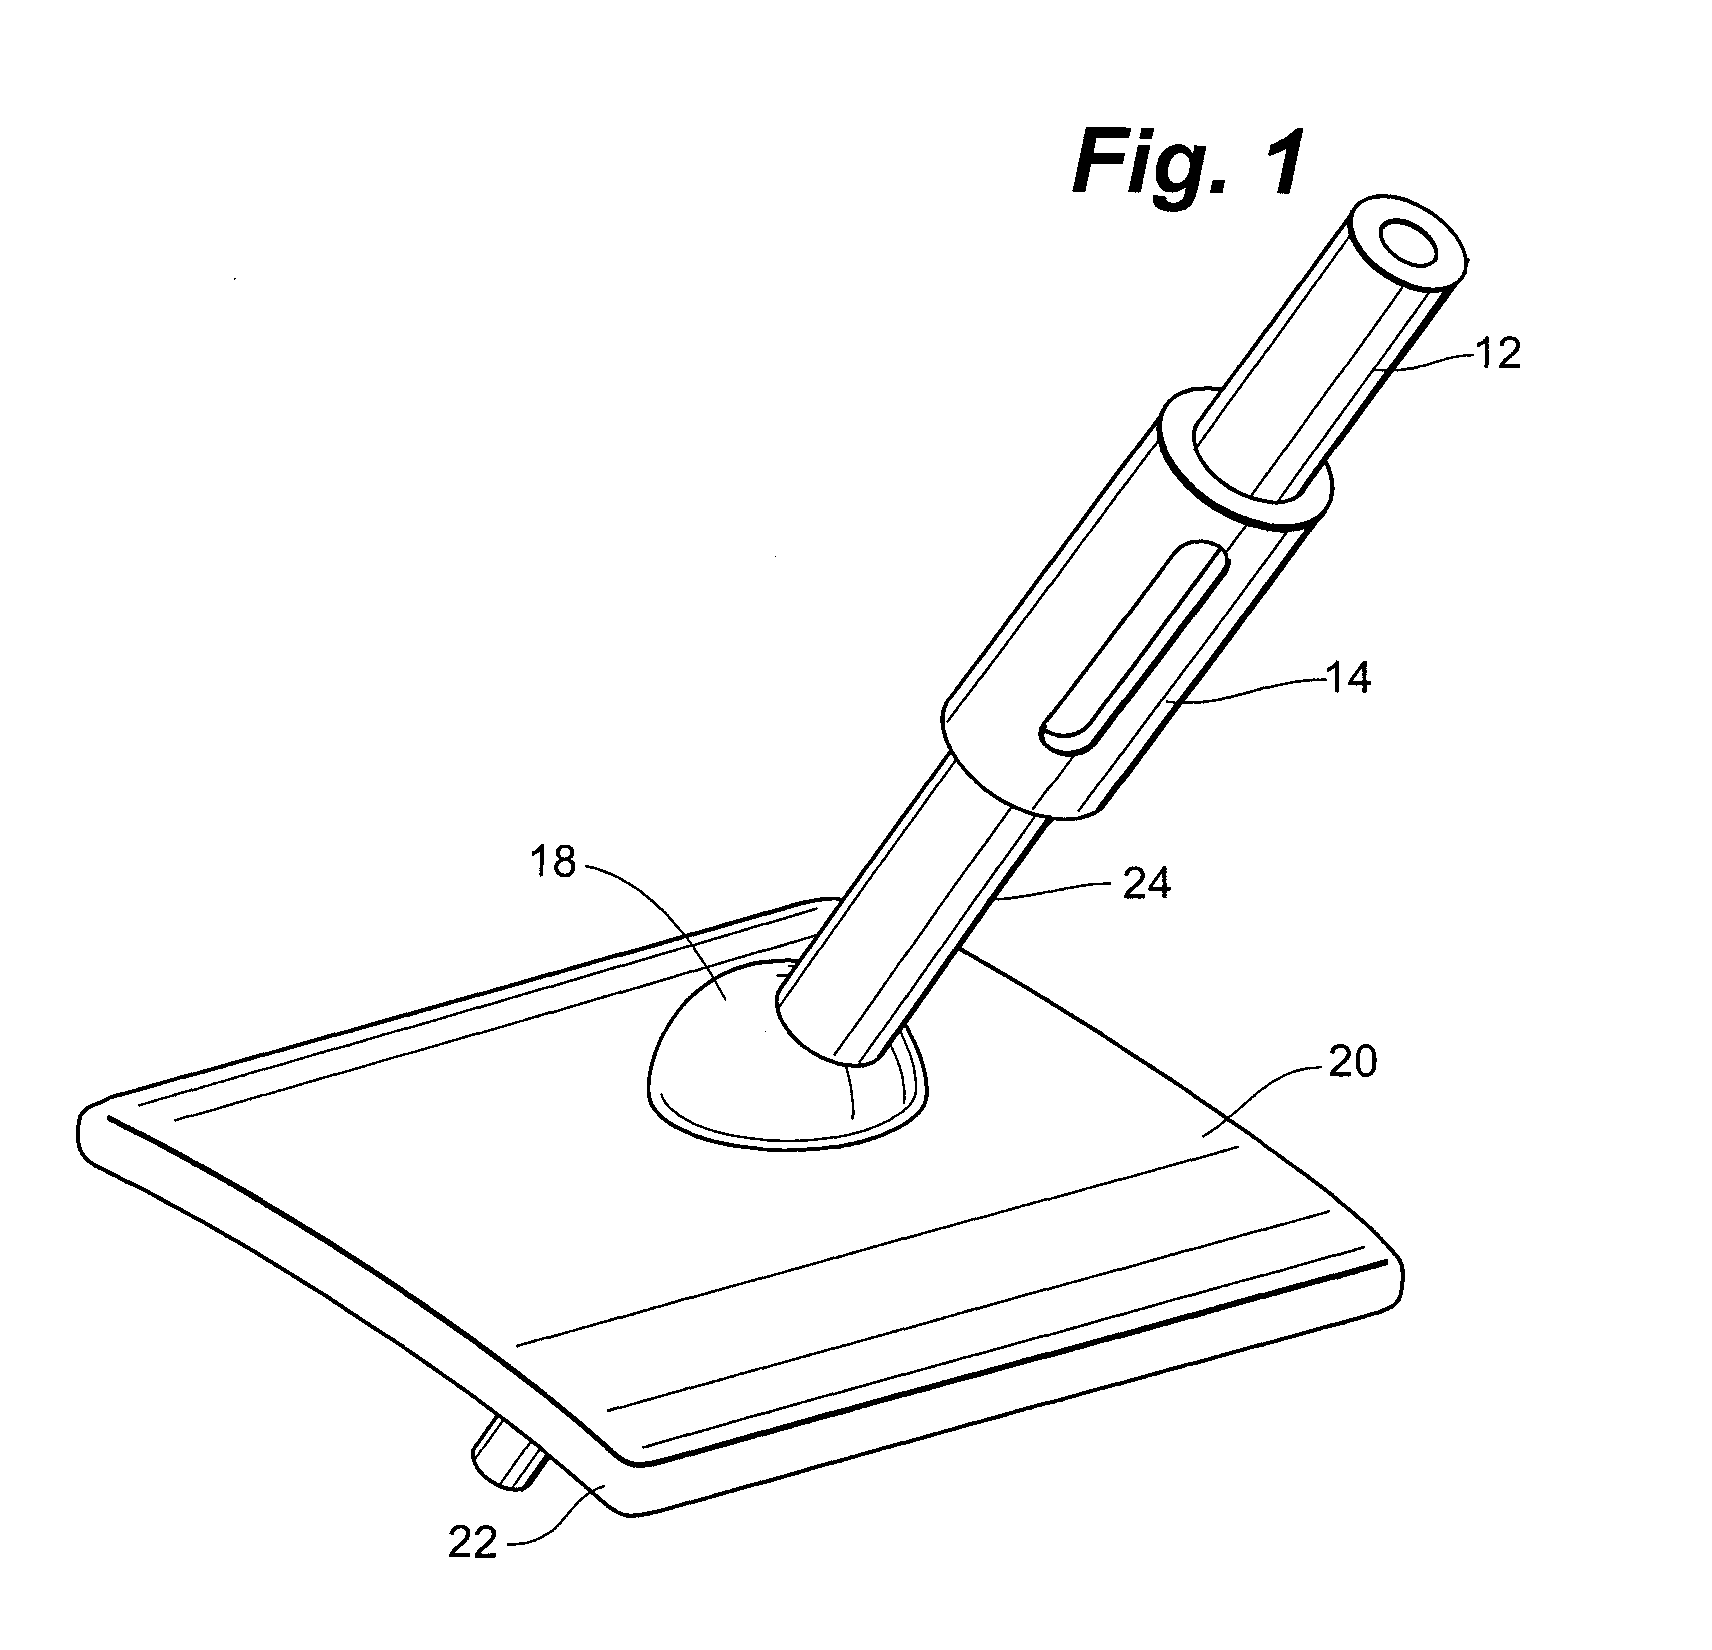 Anchorless Non-Invasive Force Dissipation System for Orthopedic Instrumentation